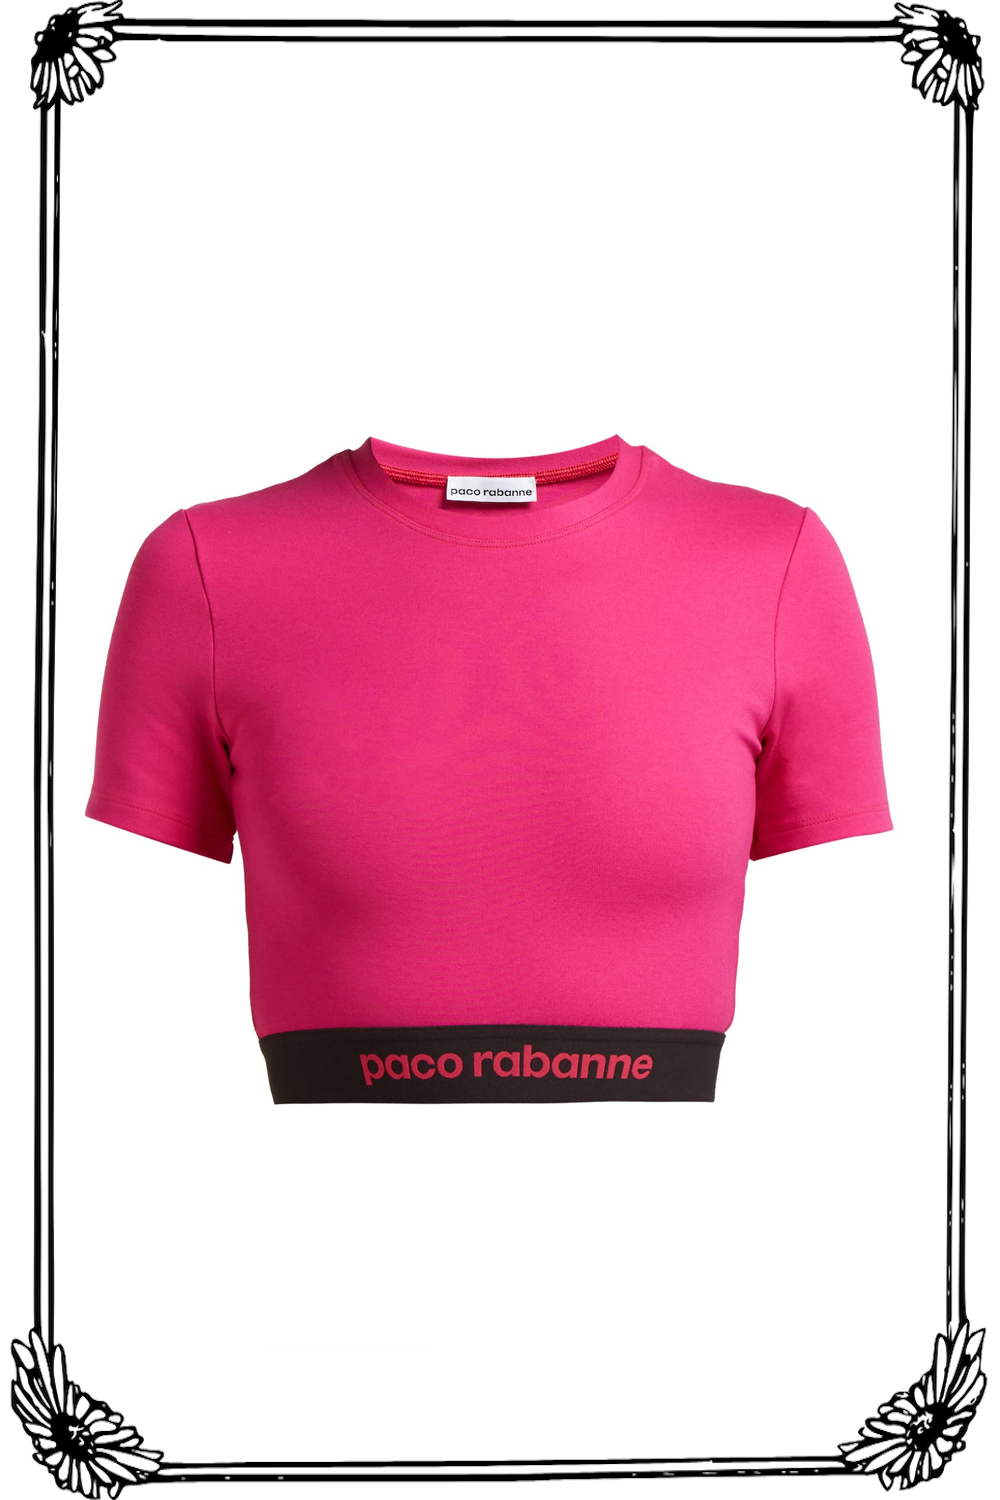   Paco Rabanne Bodyline Logo-Jacquard Crop Top  ($48, on sale from $120)  